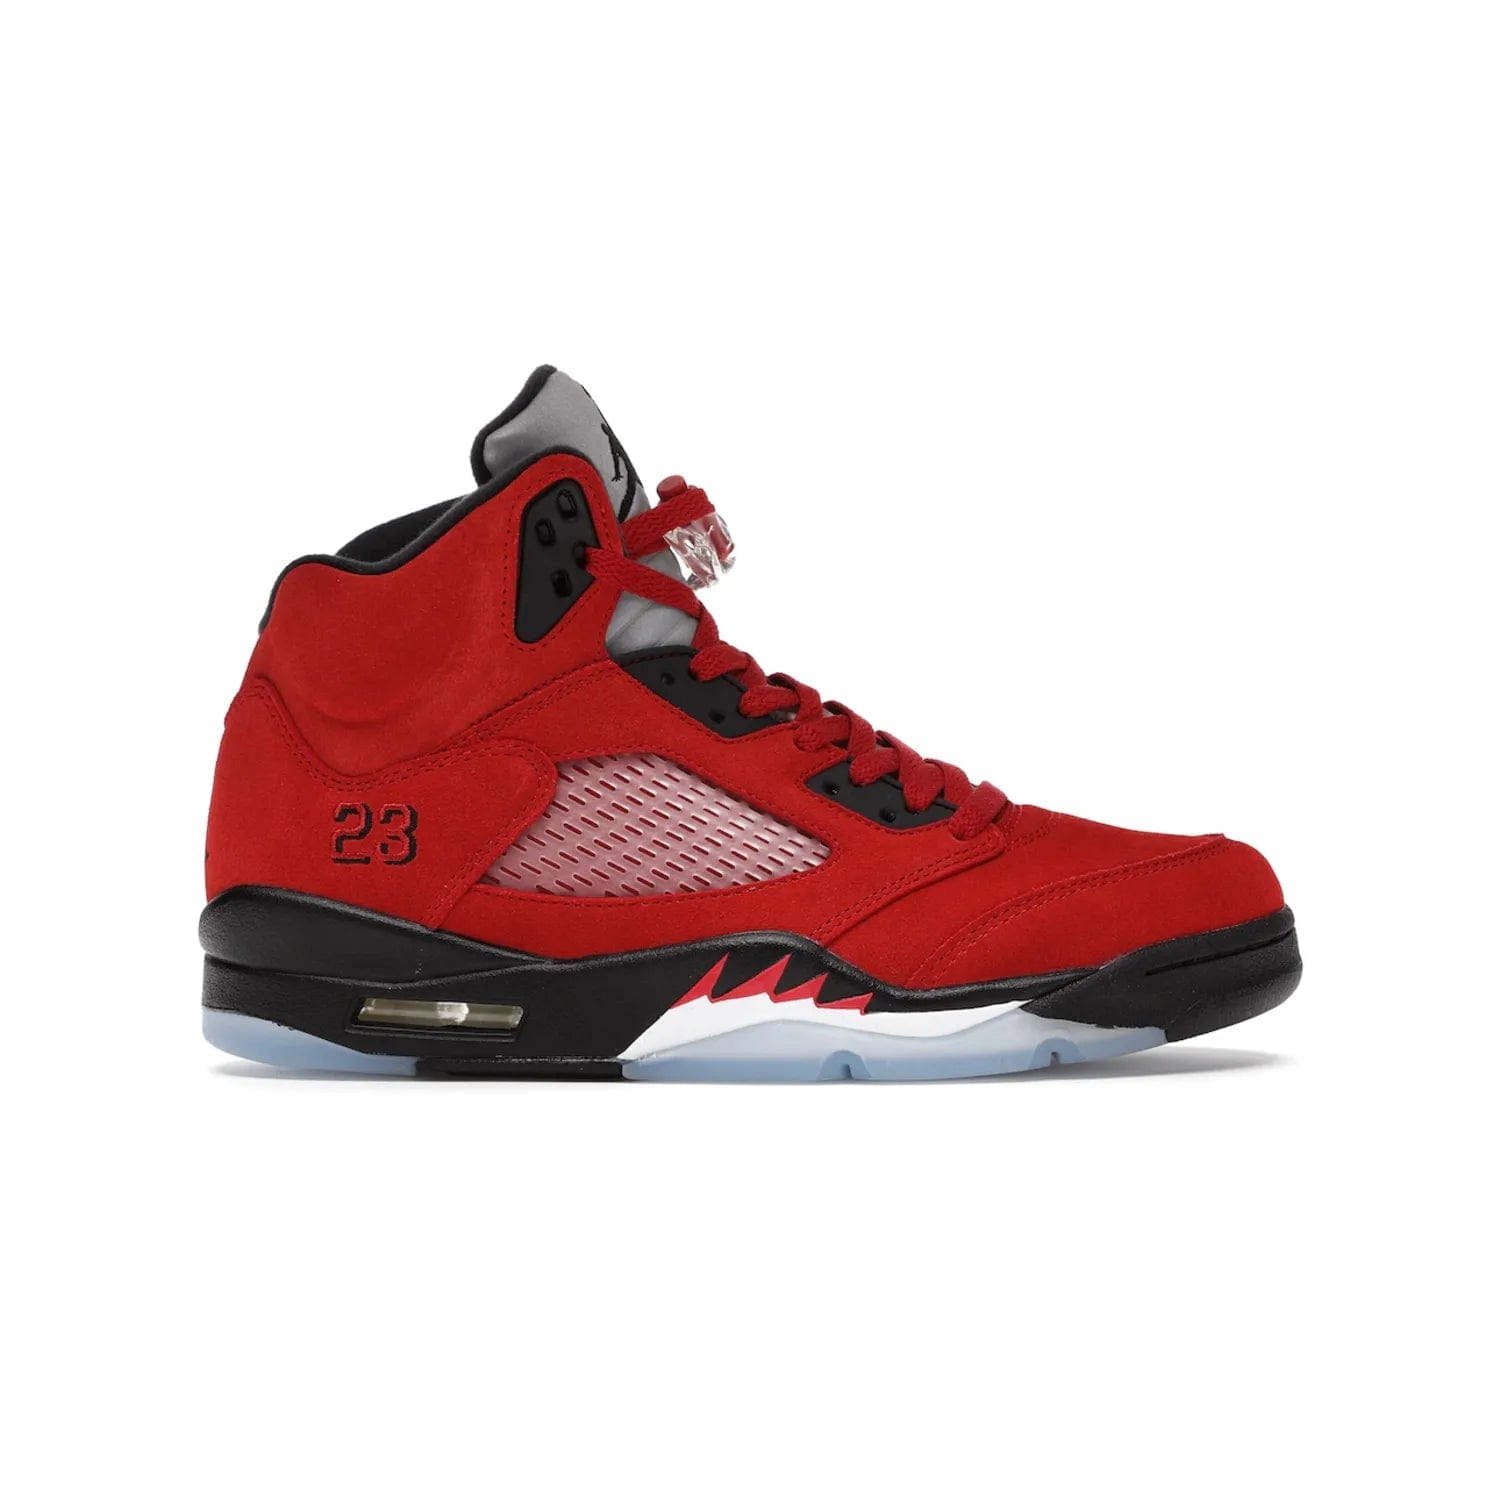 Jordan 5 Retro Raging Bull Red (2021) - Image 1 - Only at www.BallersClubKickz.com - Get ready for the 2021 stand-alone release of the Air Jordan 5 Raging Bulls! This all-suede upper combines luxe details like a Jumpman logo, red & black "23" embroidery and shark tooth detailing, atop a black midsole. Don't miss out - release date in April 2021 for $190.